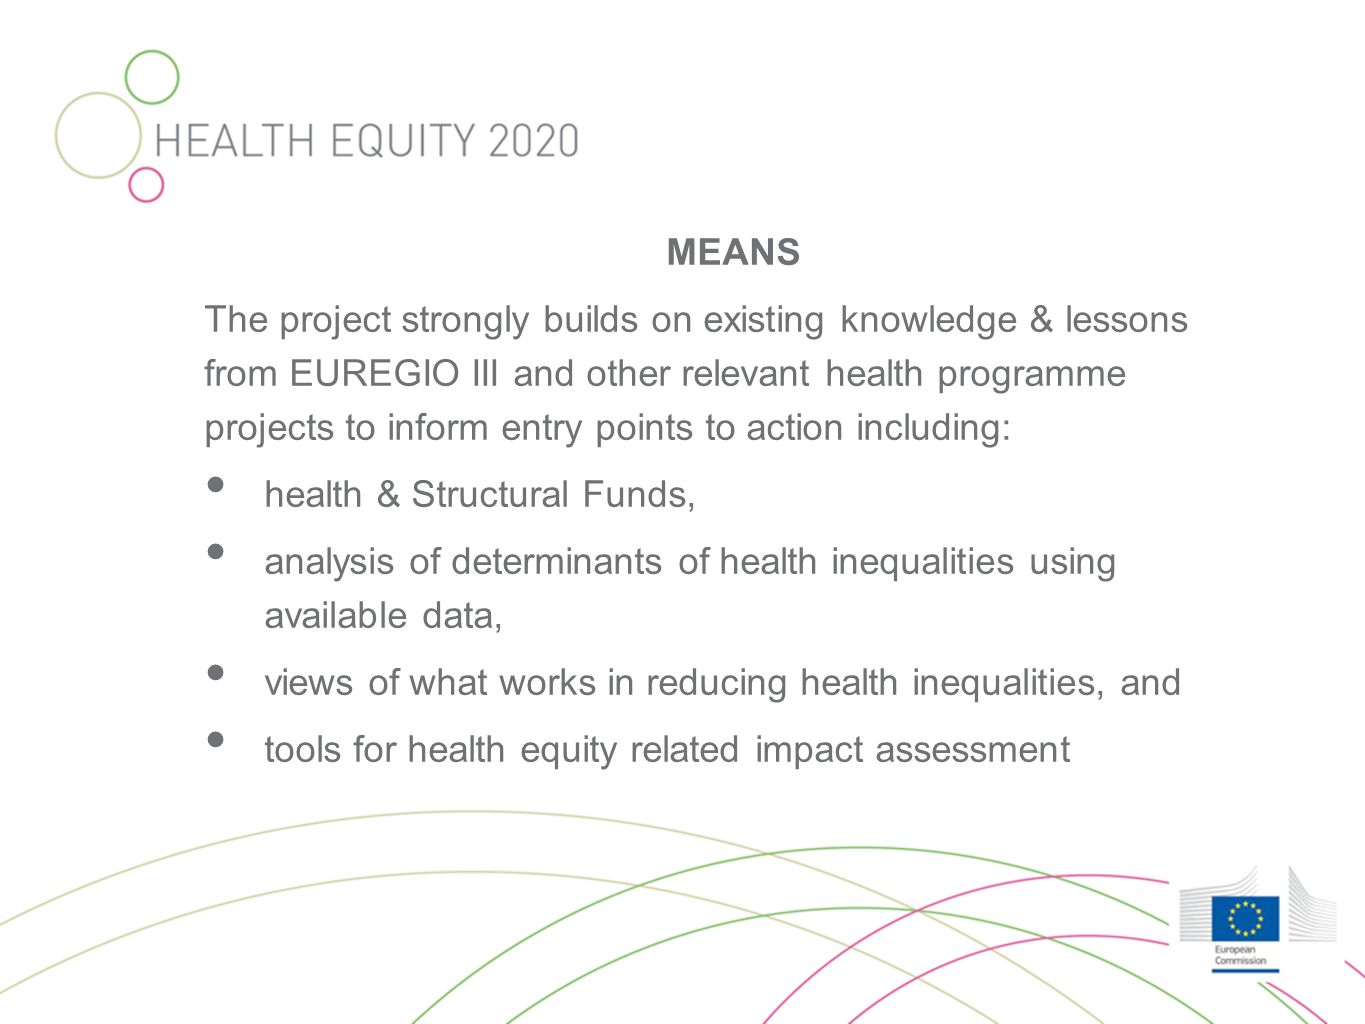 MEANS The project strongly builds on existing knowledge & lessons from EUREGIO III and other relevant health programme projects to inform entry points to action including: health & Structural Funds, analysis of determinants of health inequalities using available data, views of what works in reducing health inequalities, and tools for health equity related impact assessment